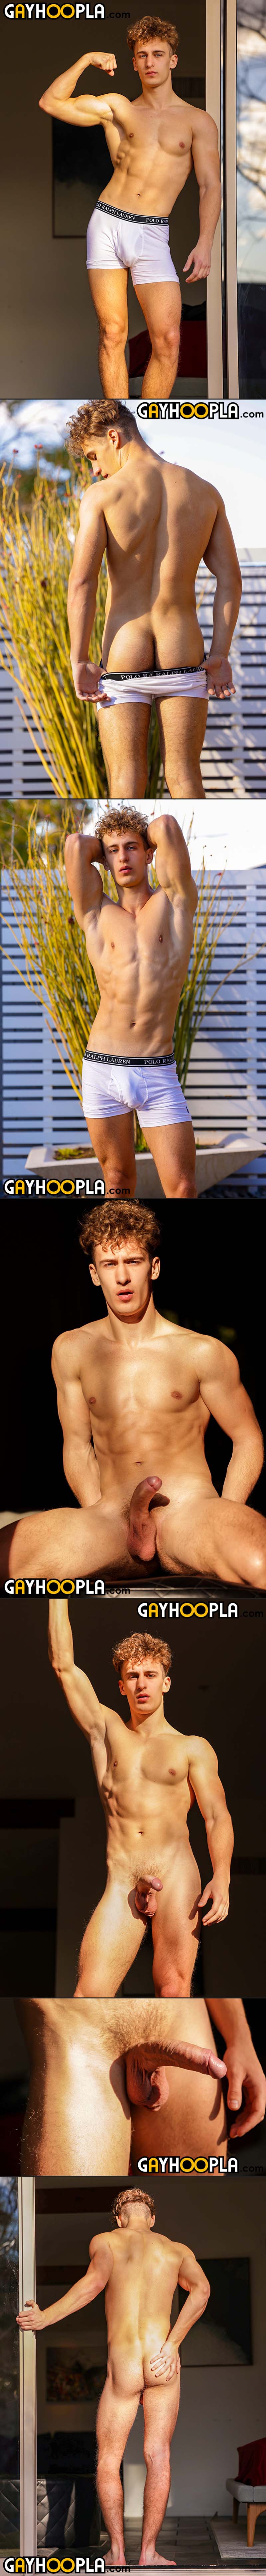 Maxim Malotov's First Performance in Front of the Camera for Porn Production at GayHoopla